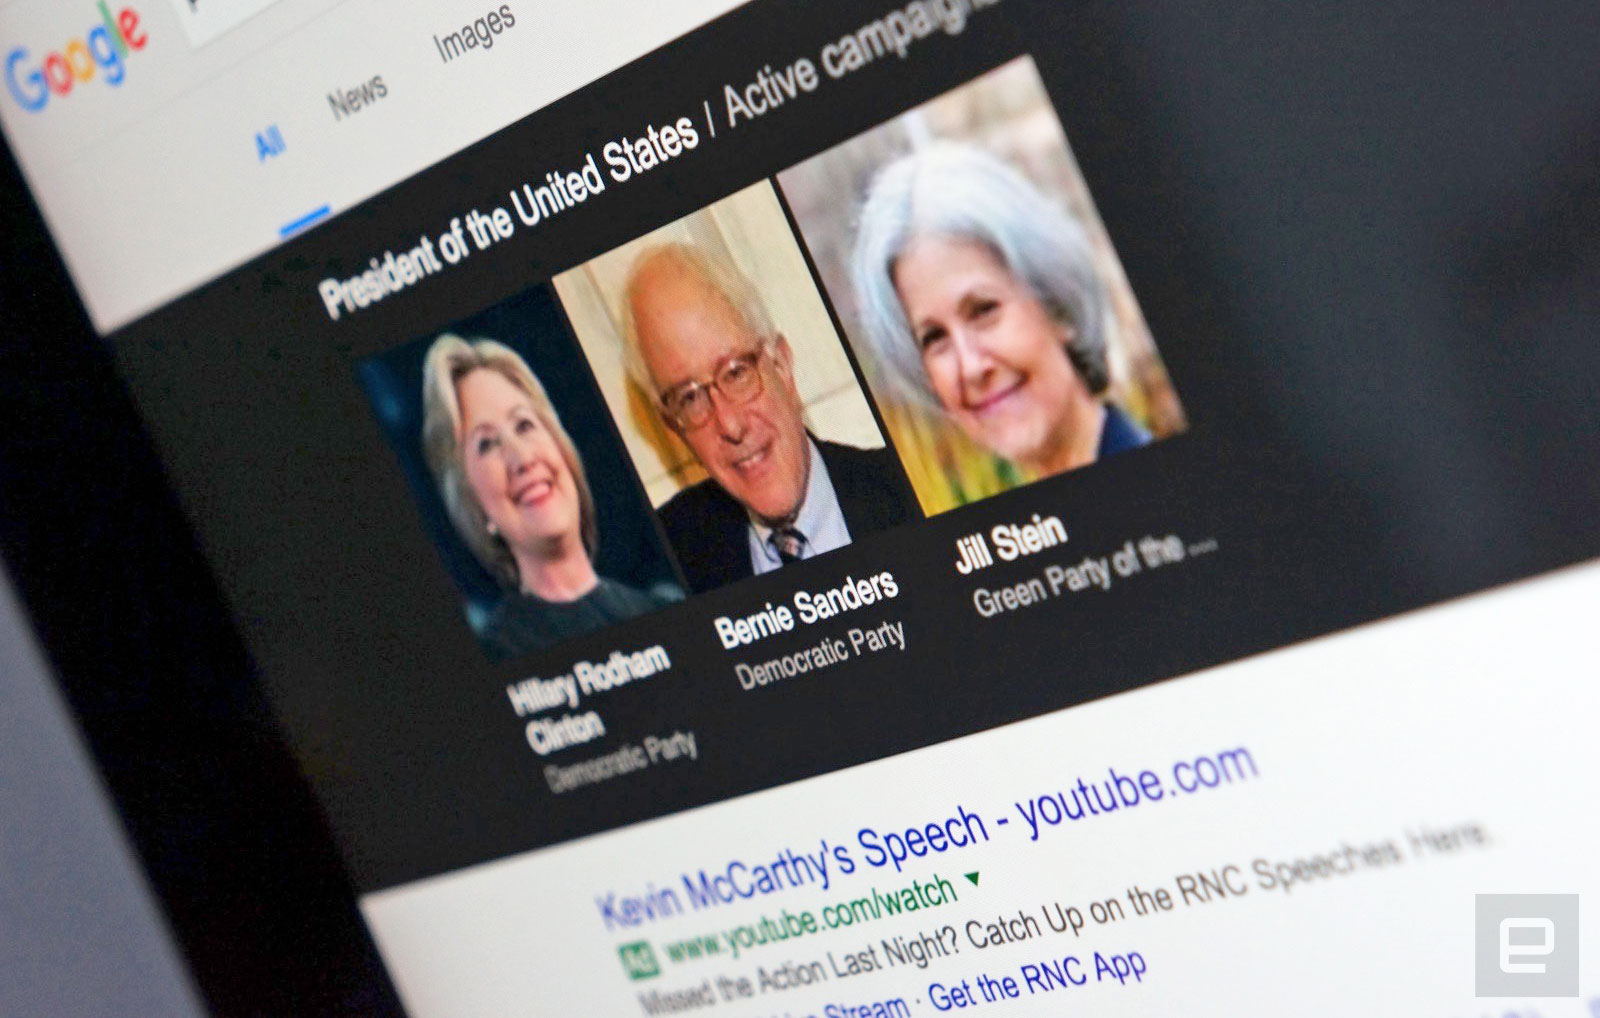 Google searches omitted key US presidential candidates (update: bug)